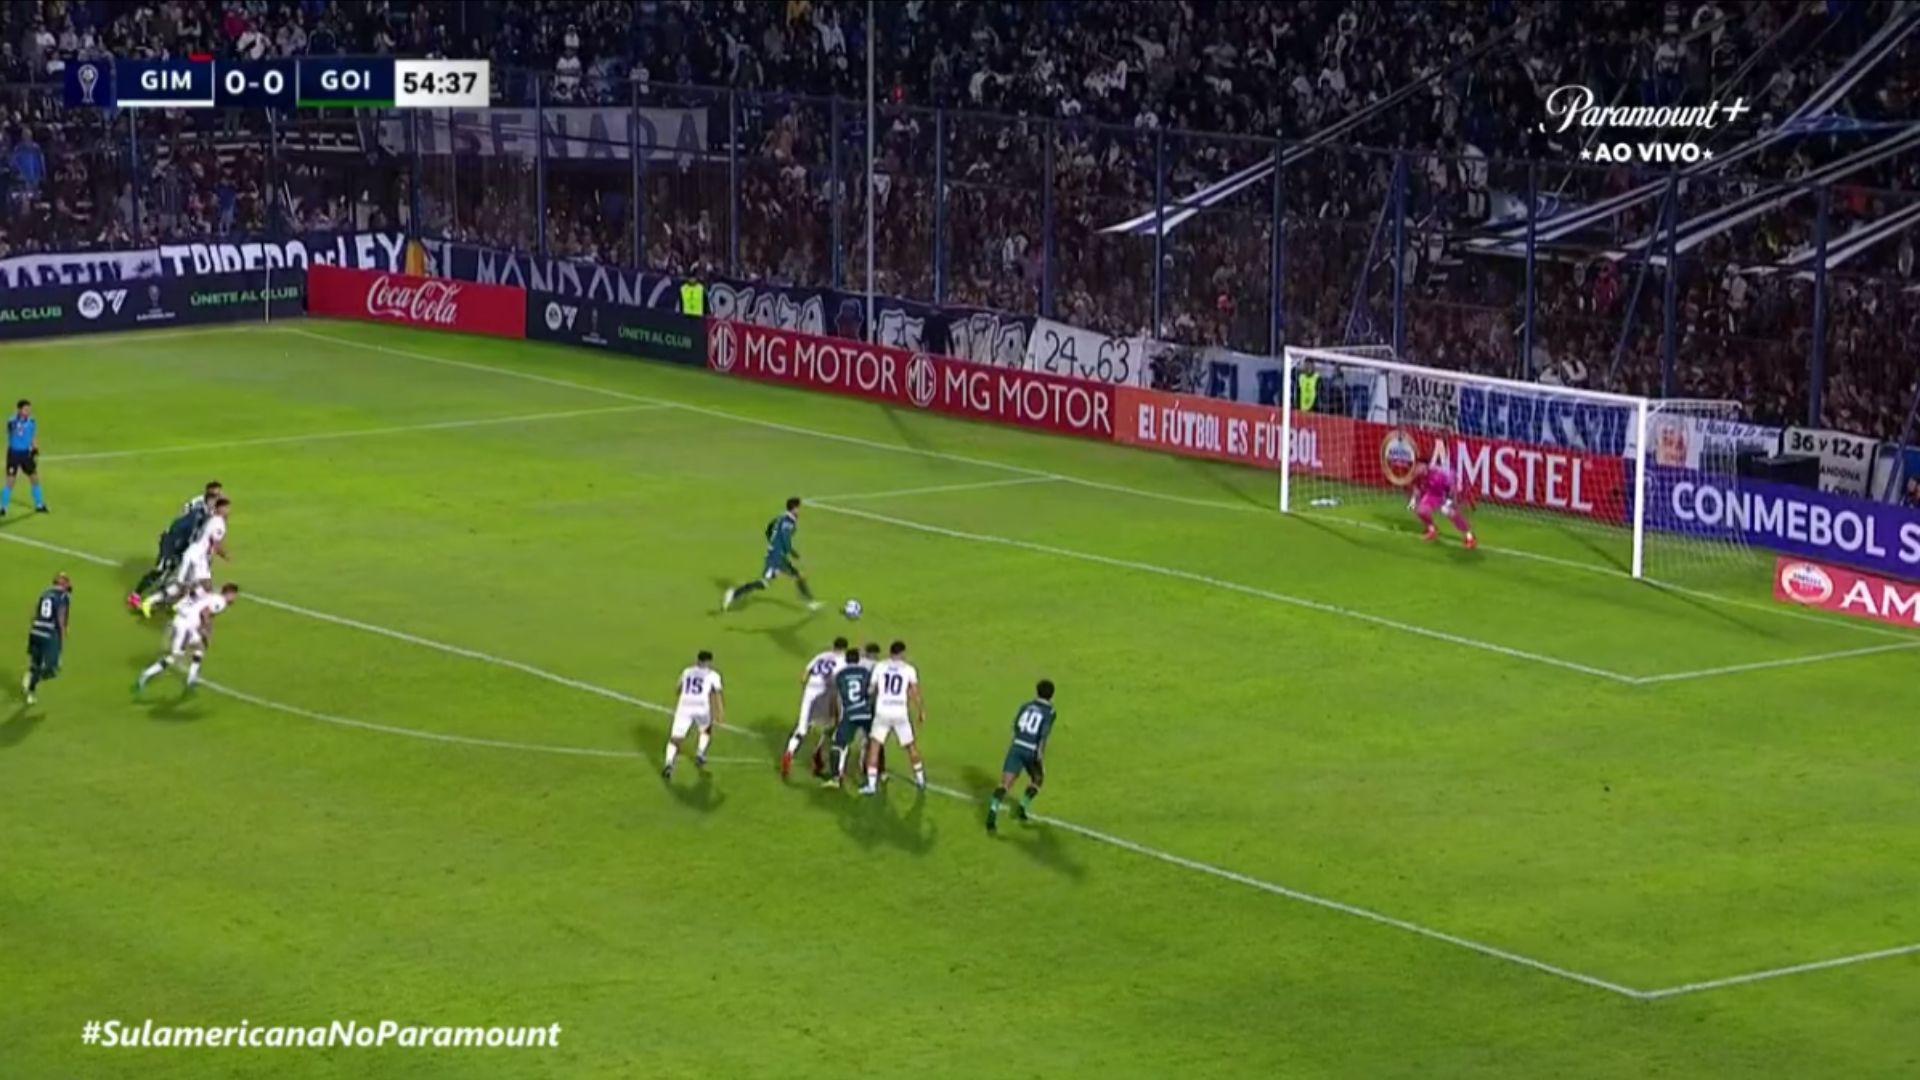 Moment of the first goal of Goiás